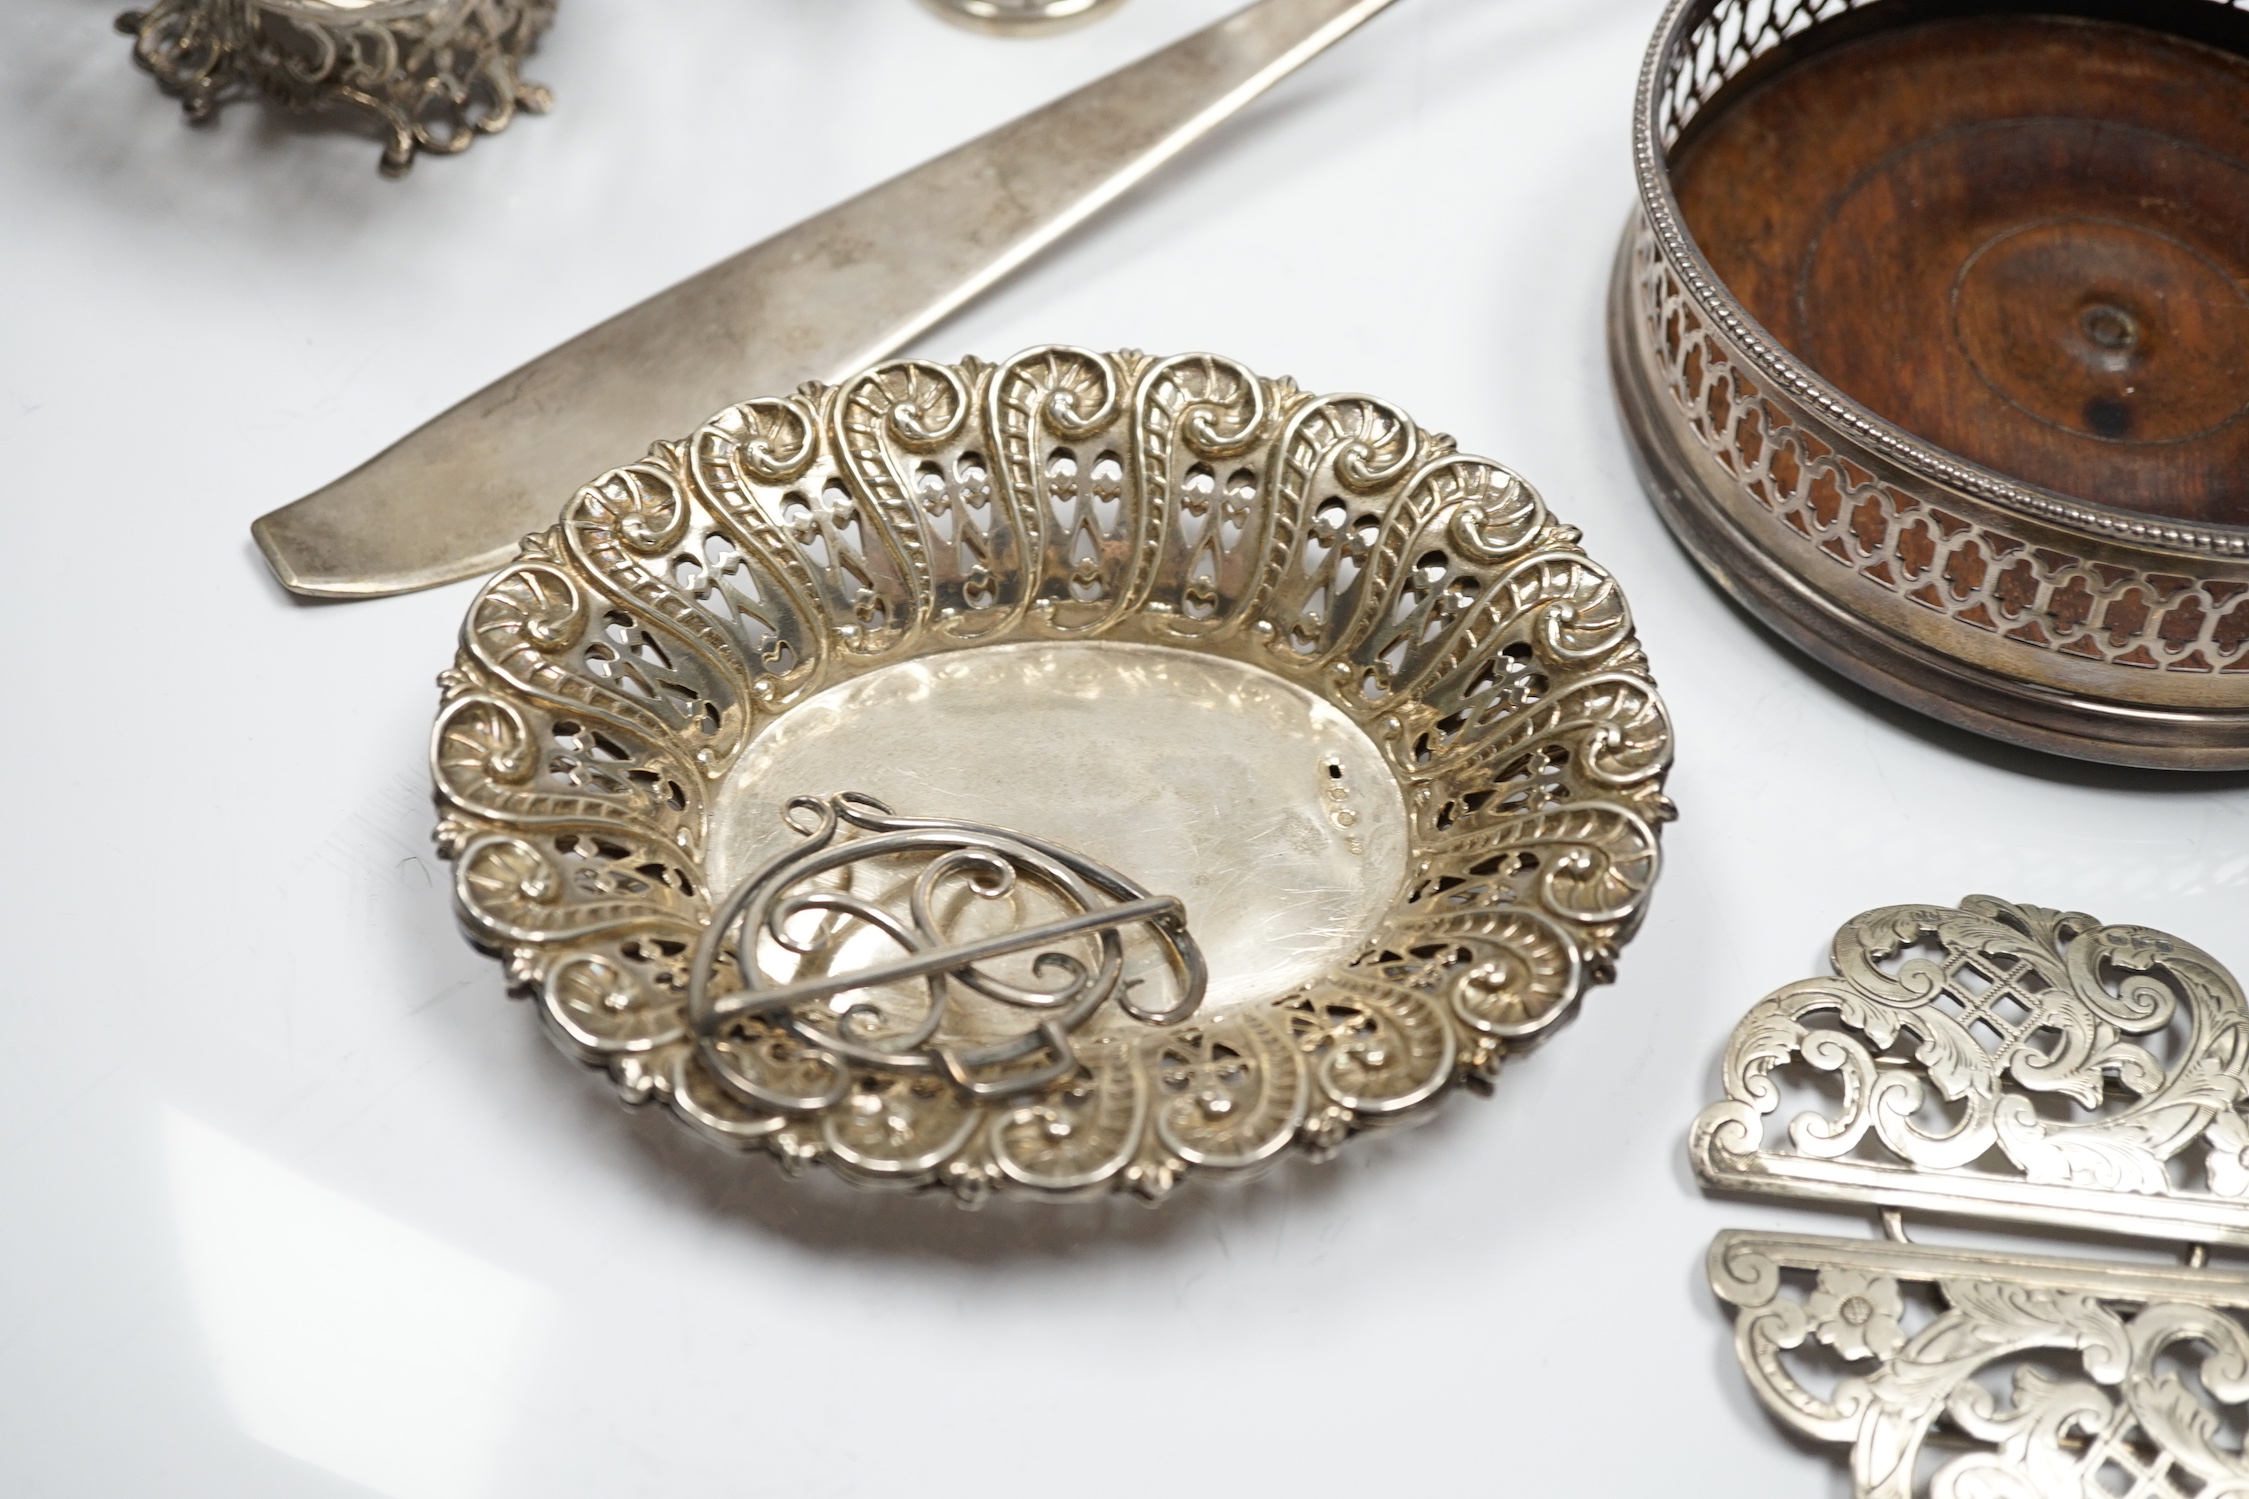 Assorted silver and white metal items including a pair of late Victorian pierced silver bonbon dishes, a pierced silver small bowl, a modern silver wine coaster, a silver belt buckle, white metal belt buckle, two contine